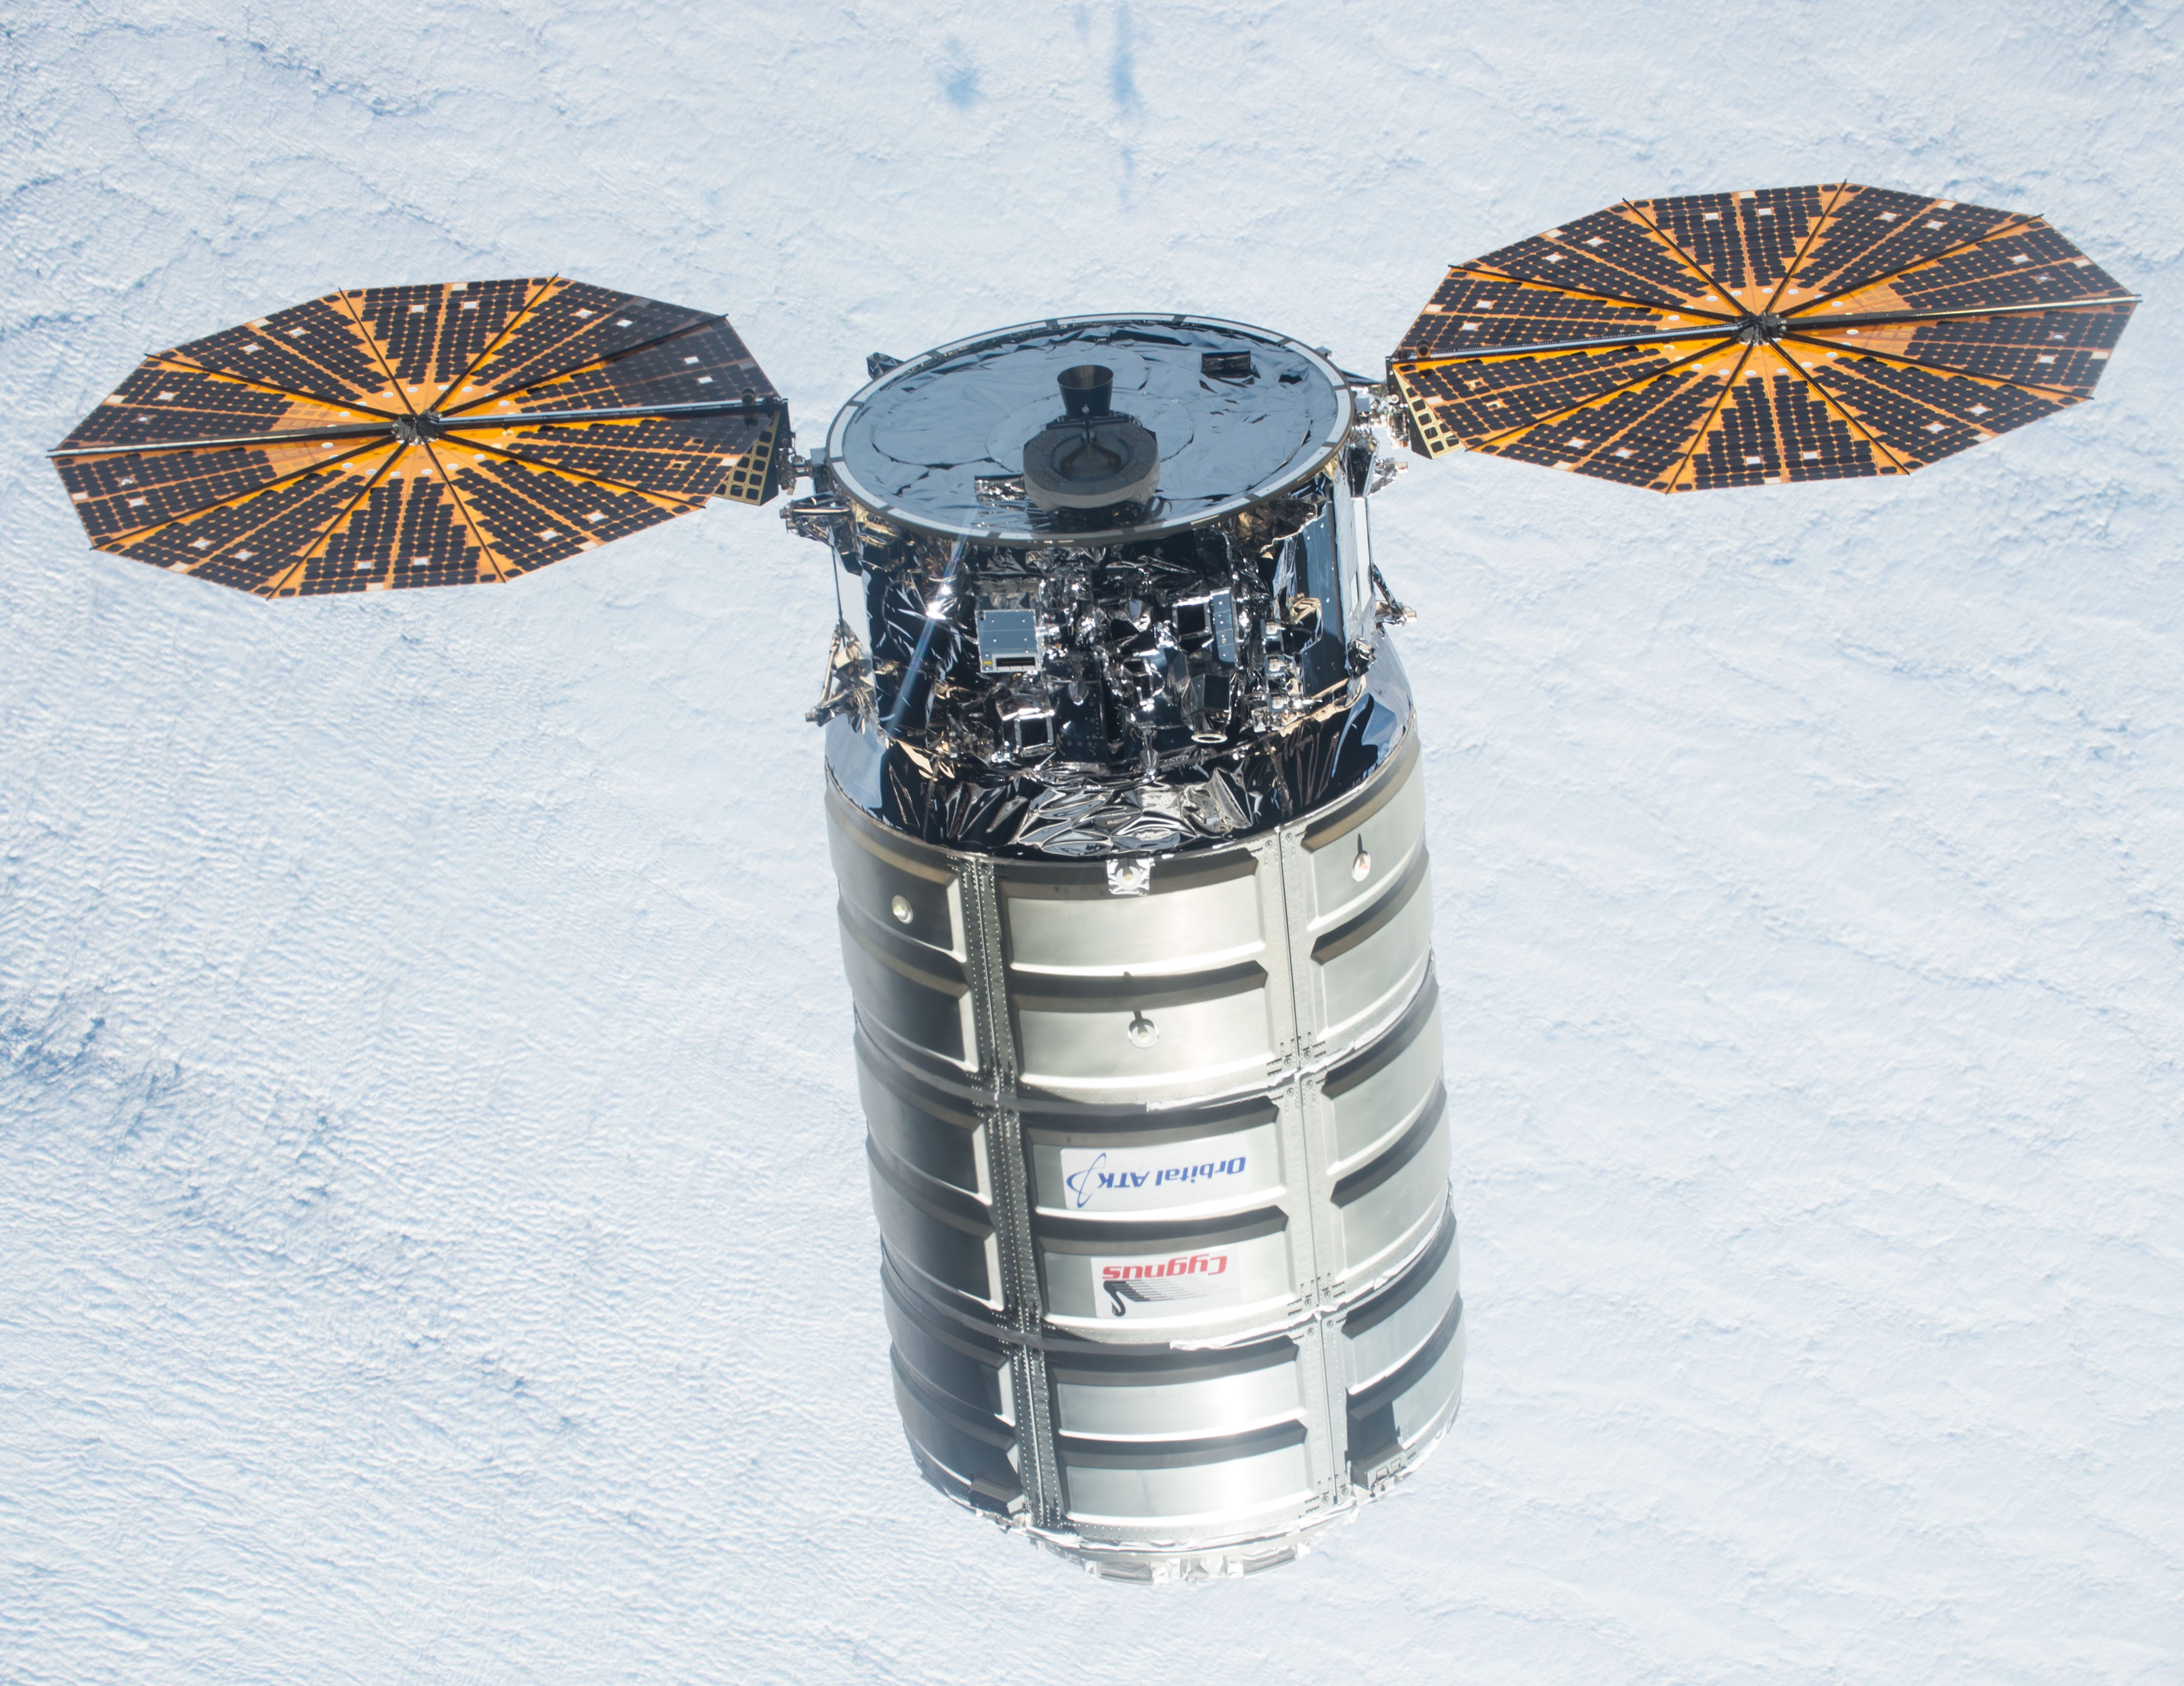 The first Enhanced Cygnus arriving at the space station in 2015; compare against the smaller standard Cygnus